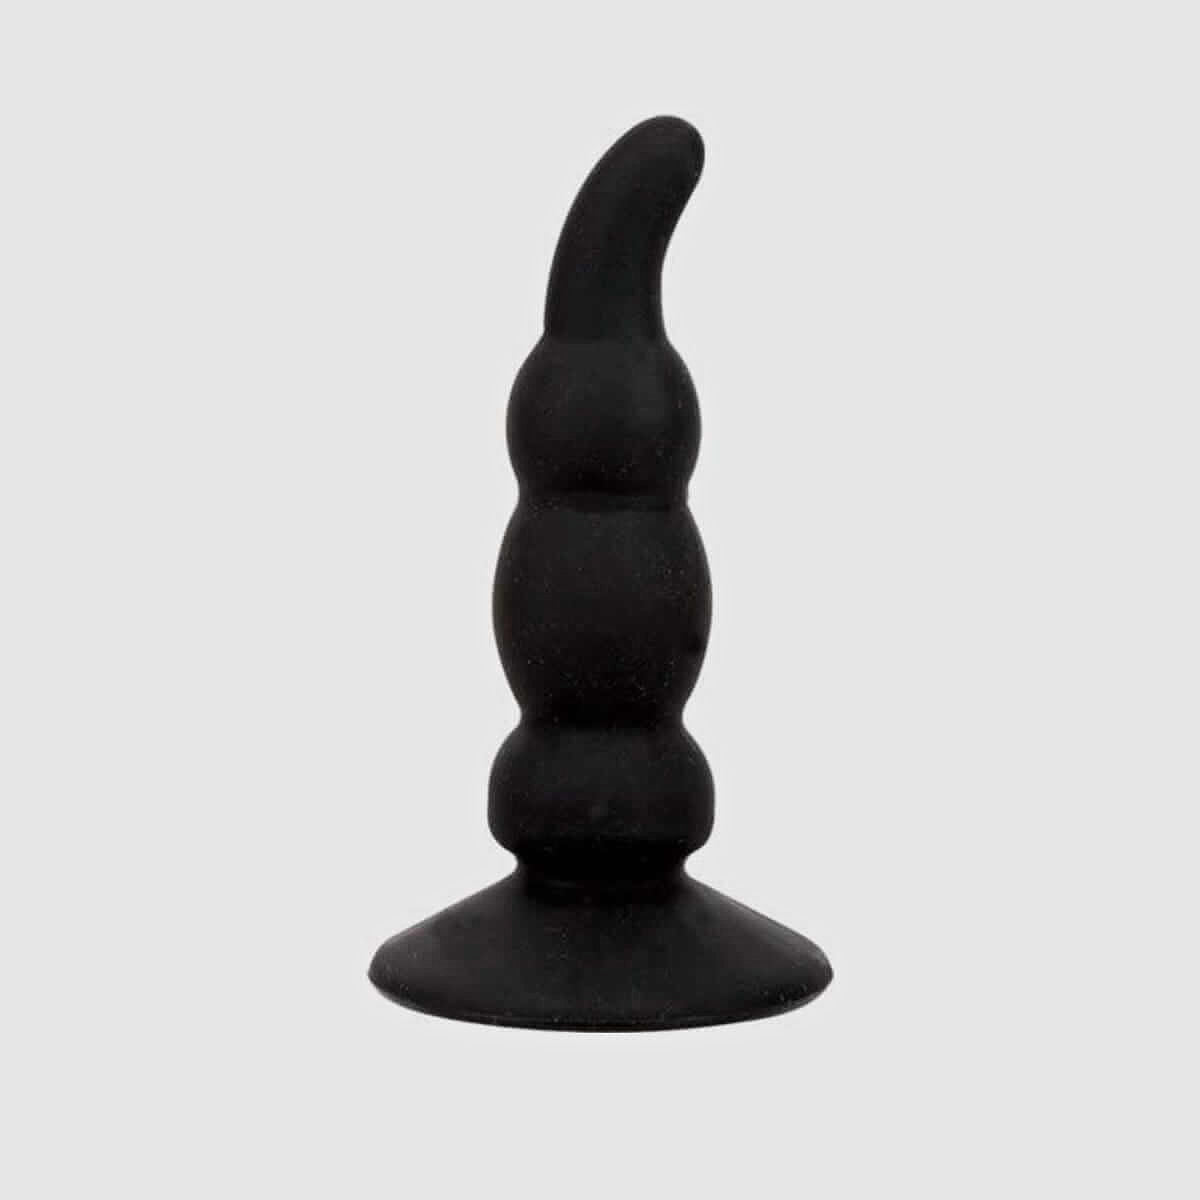 100% Silicone Triple Hump, Black - Thorn & Feather Sex Toy Canada